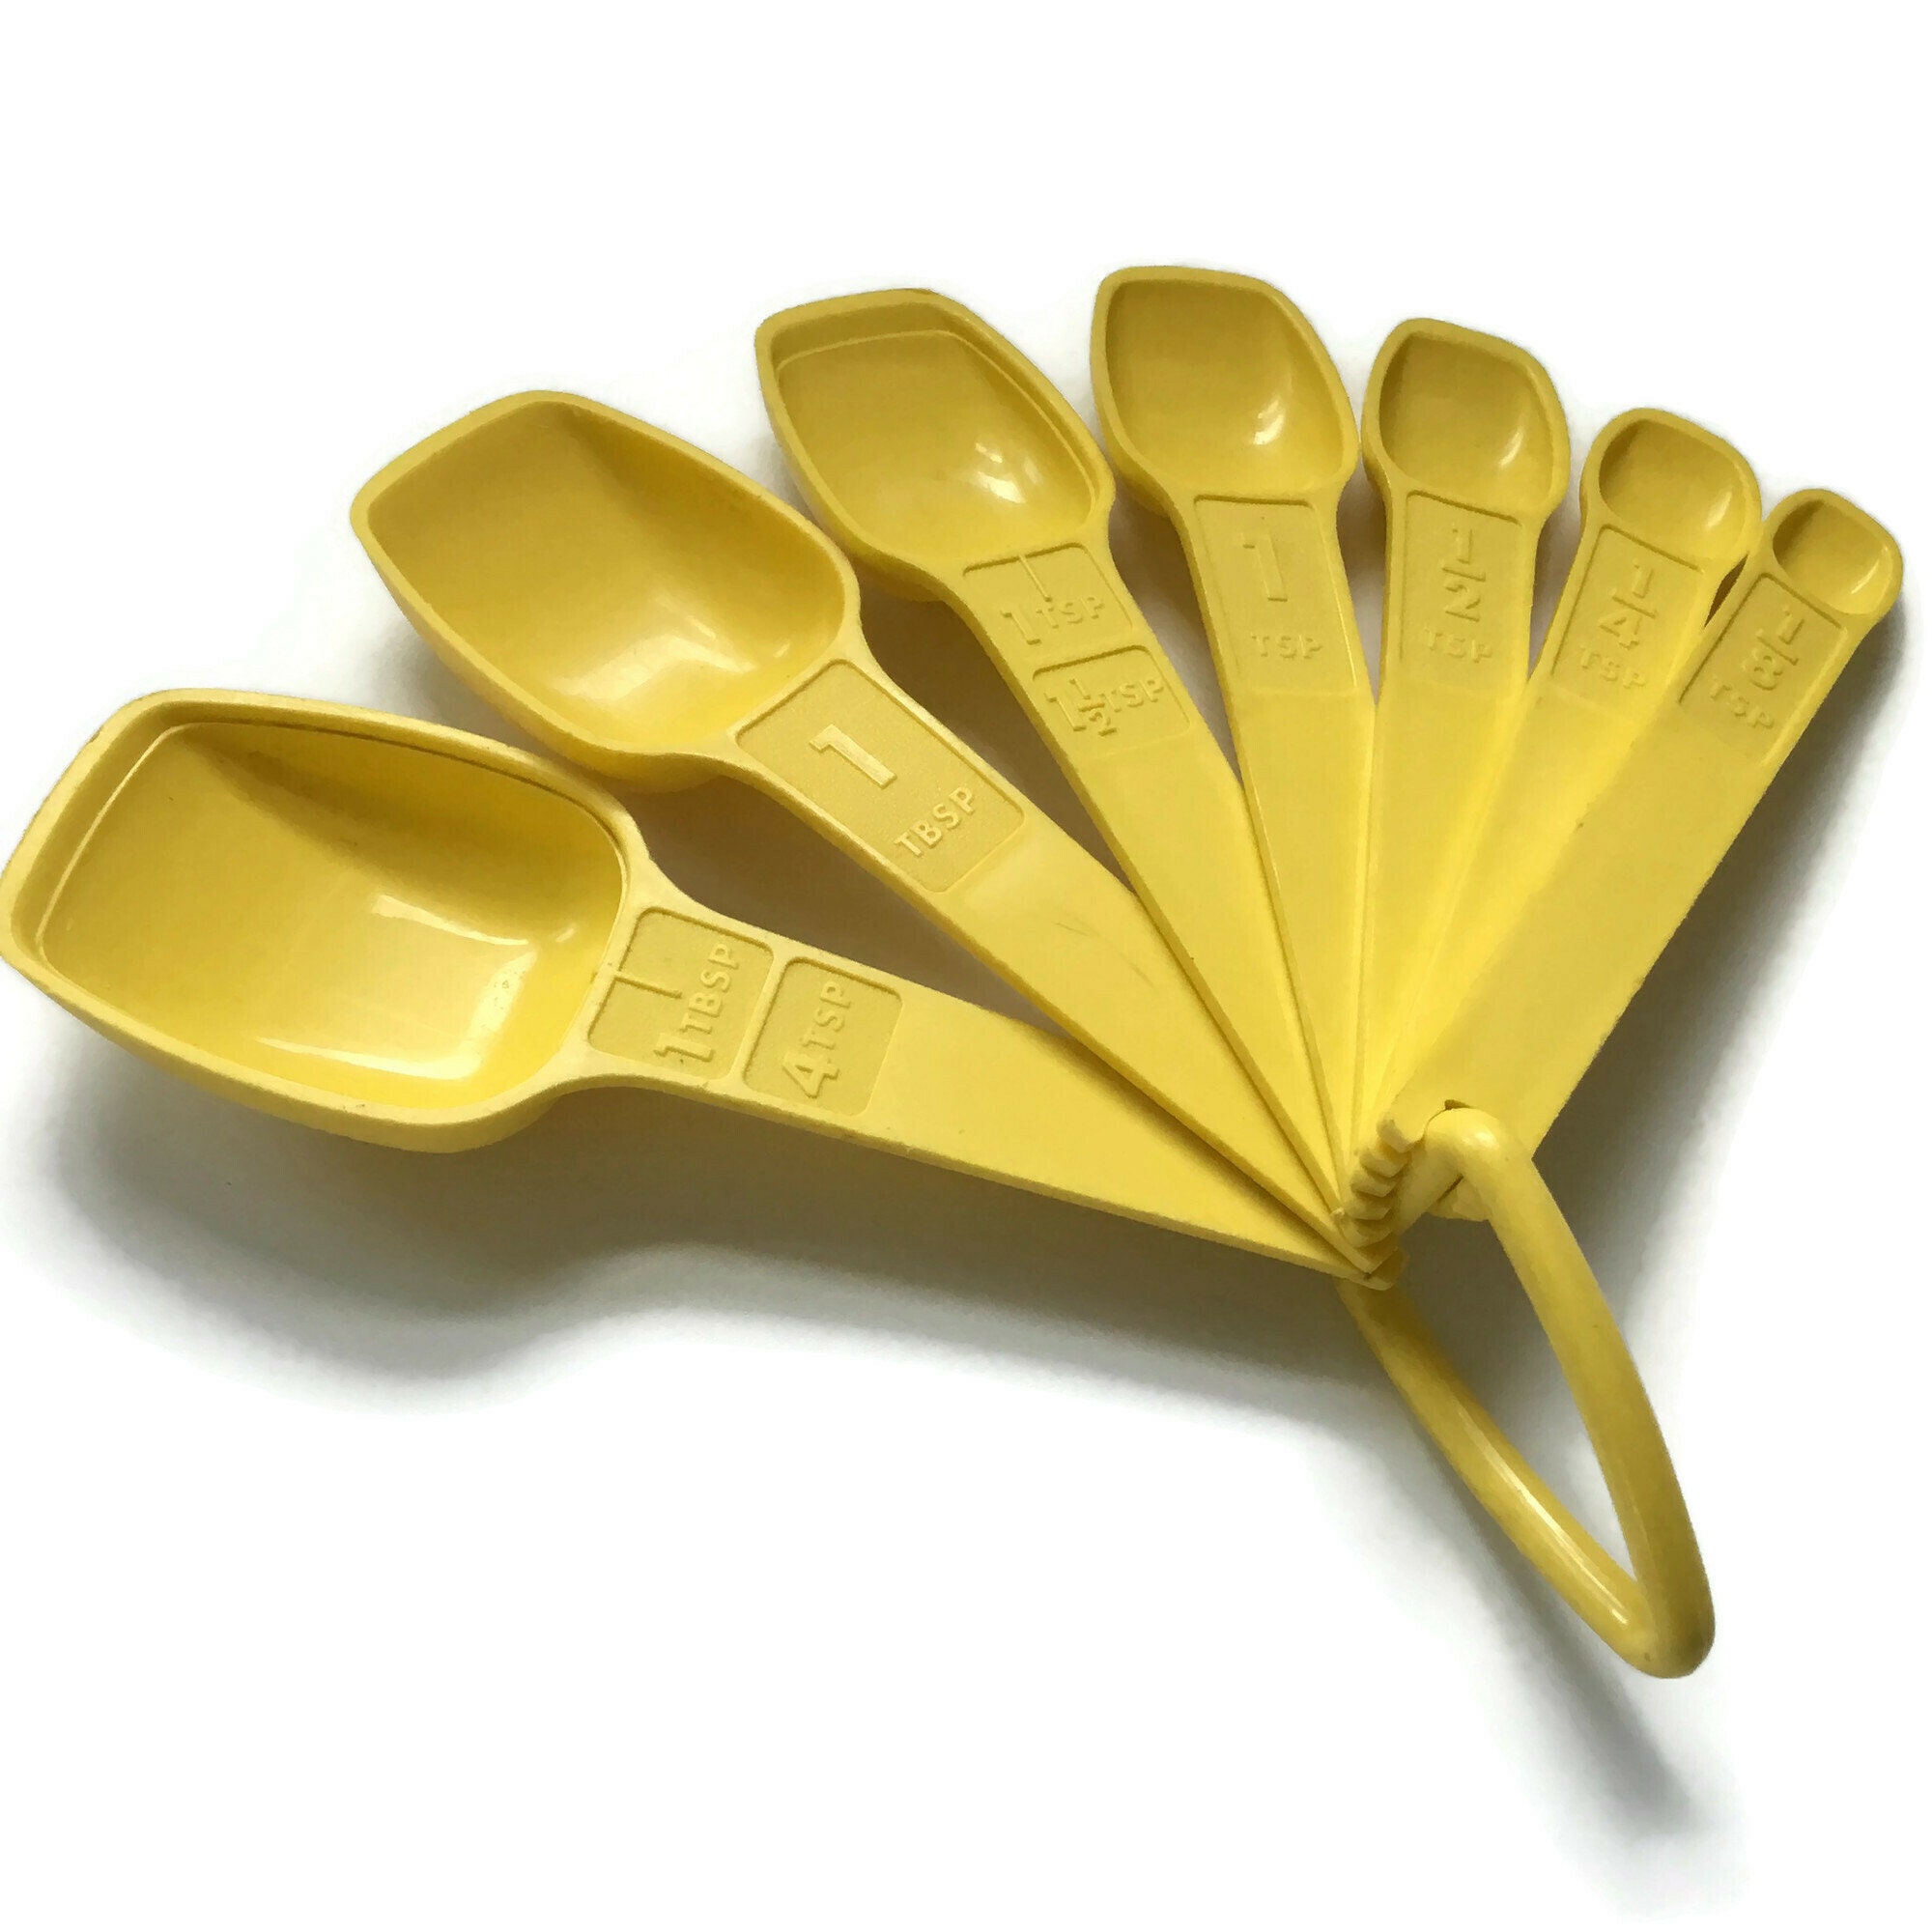 Vintage Daffodil Yellow Tupperware Stacking Set of 6 Measuring Cups